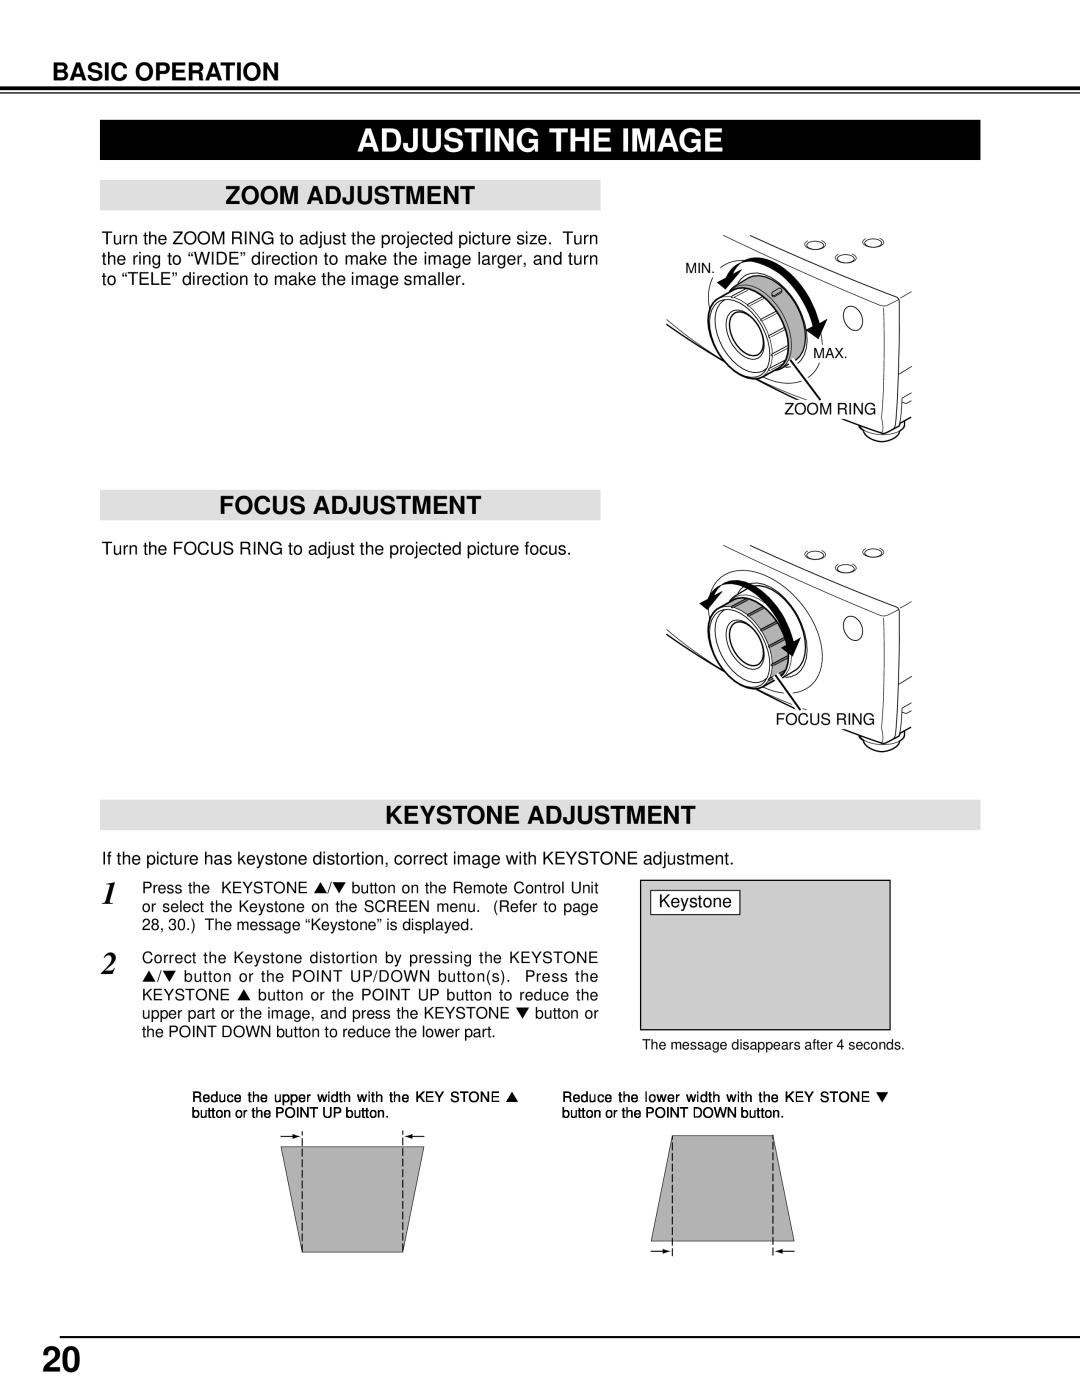 BOXLIGHT XP-5t manual Adjusting The Image, Zoom Adjustment, Focus Adjustment, Keystone Adjustment, Basic Operation 